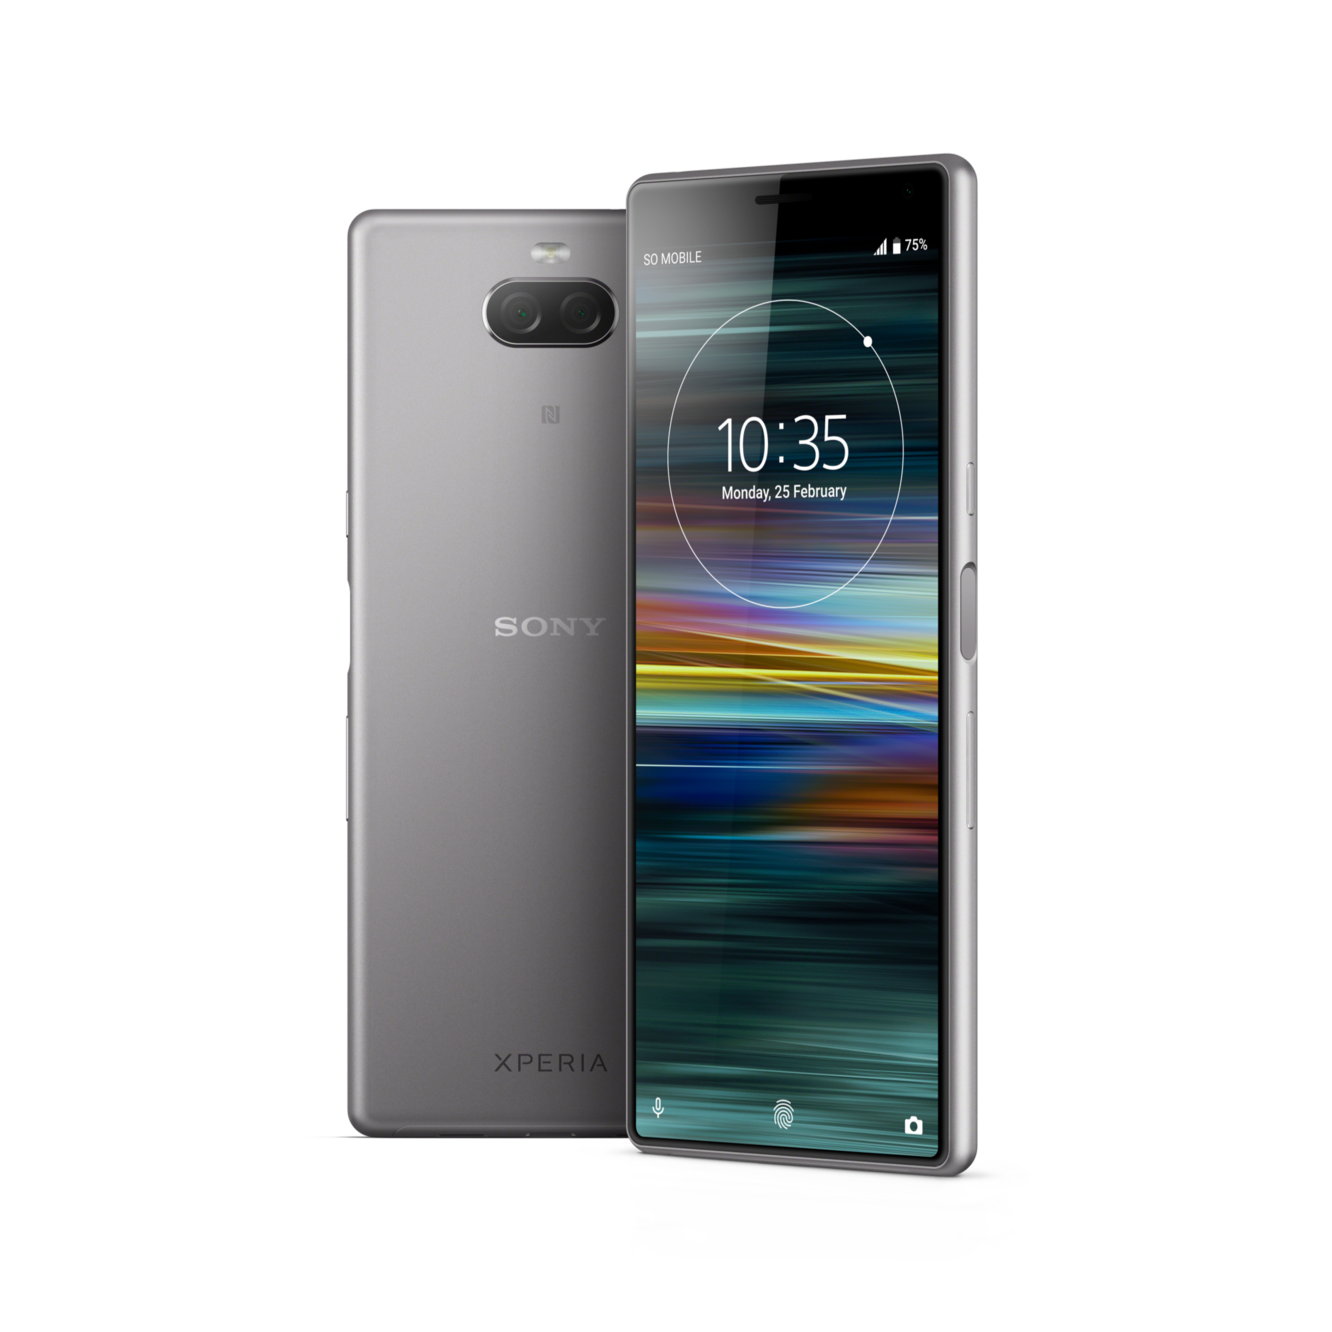 04_Xperia10_Gallery-product-image_Silver-ac4978a07c14cd35a0853e039babbd5b.png